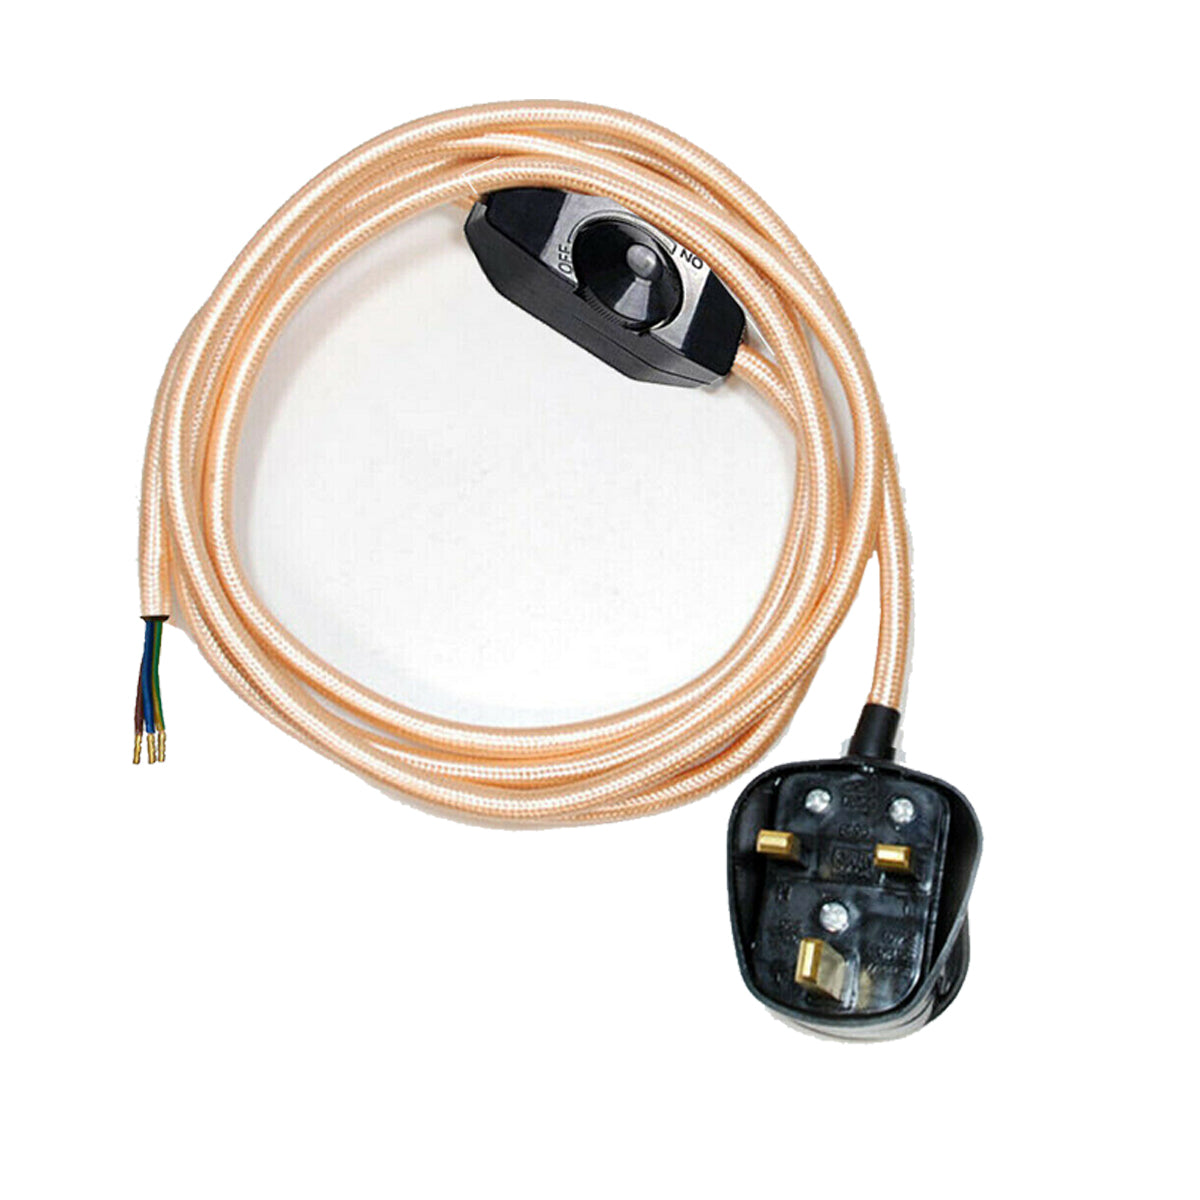 Dimmer Switch 2m Fabric Flex Cable Plug In Pendant With Short Holder~1611 - Electricalsone UK Ltd